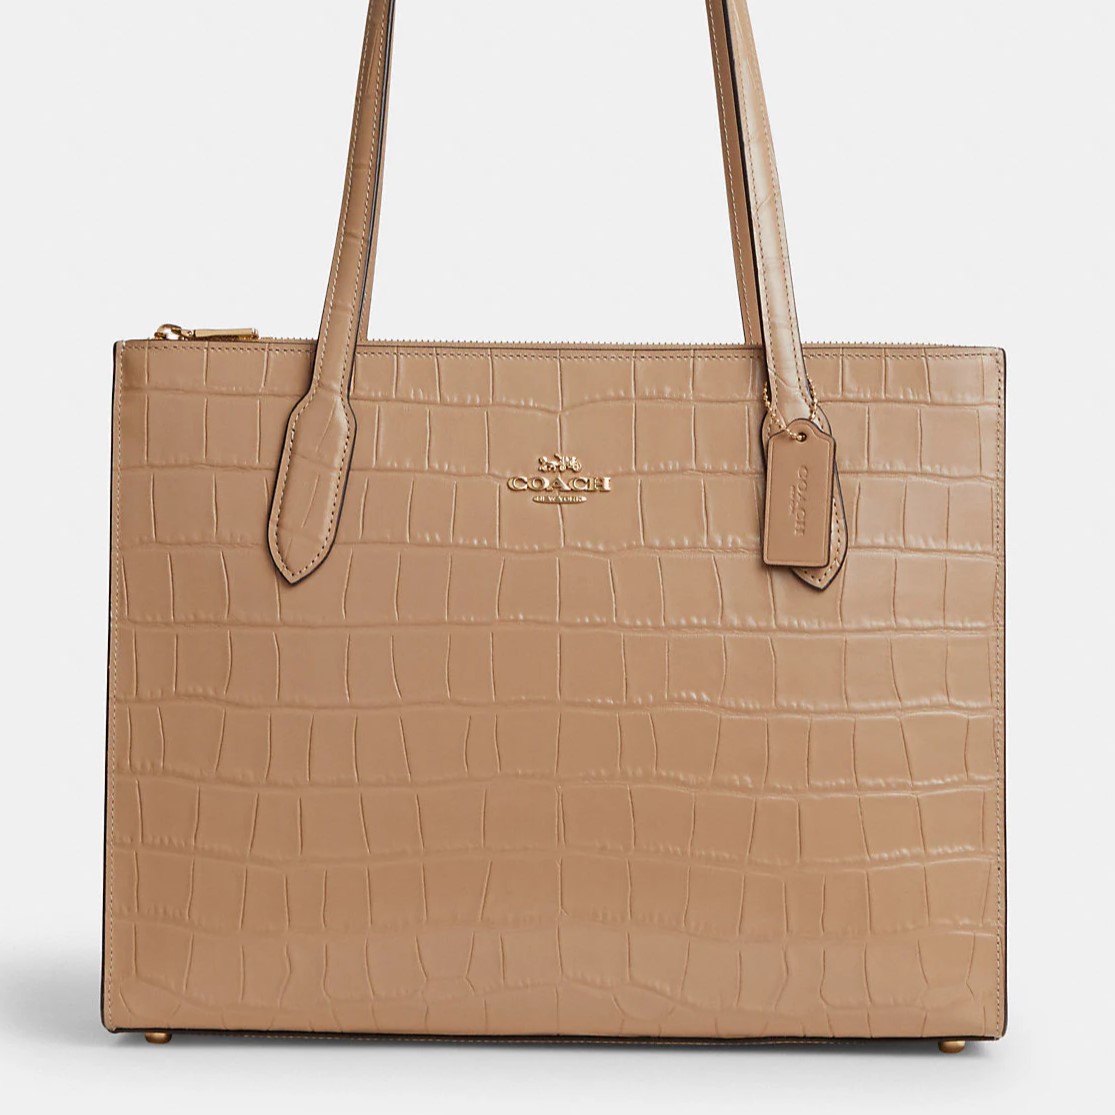 TÚI XÁCH DA LÁNG COACH NỮ NINA TOTE CROCODILE-EMBOSSED LEATHER AND SMOOTH LEATHER BAG IN GOLD TAUPE CL654 3